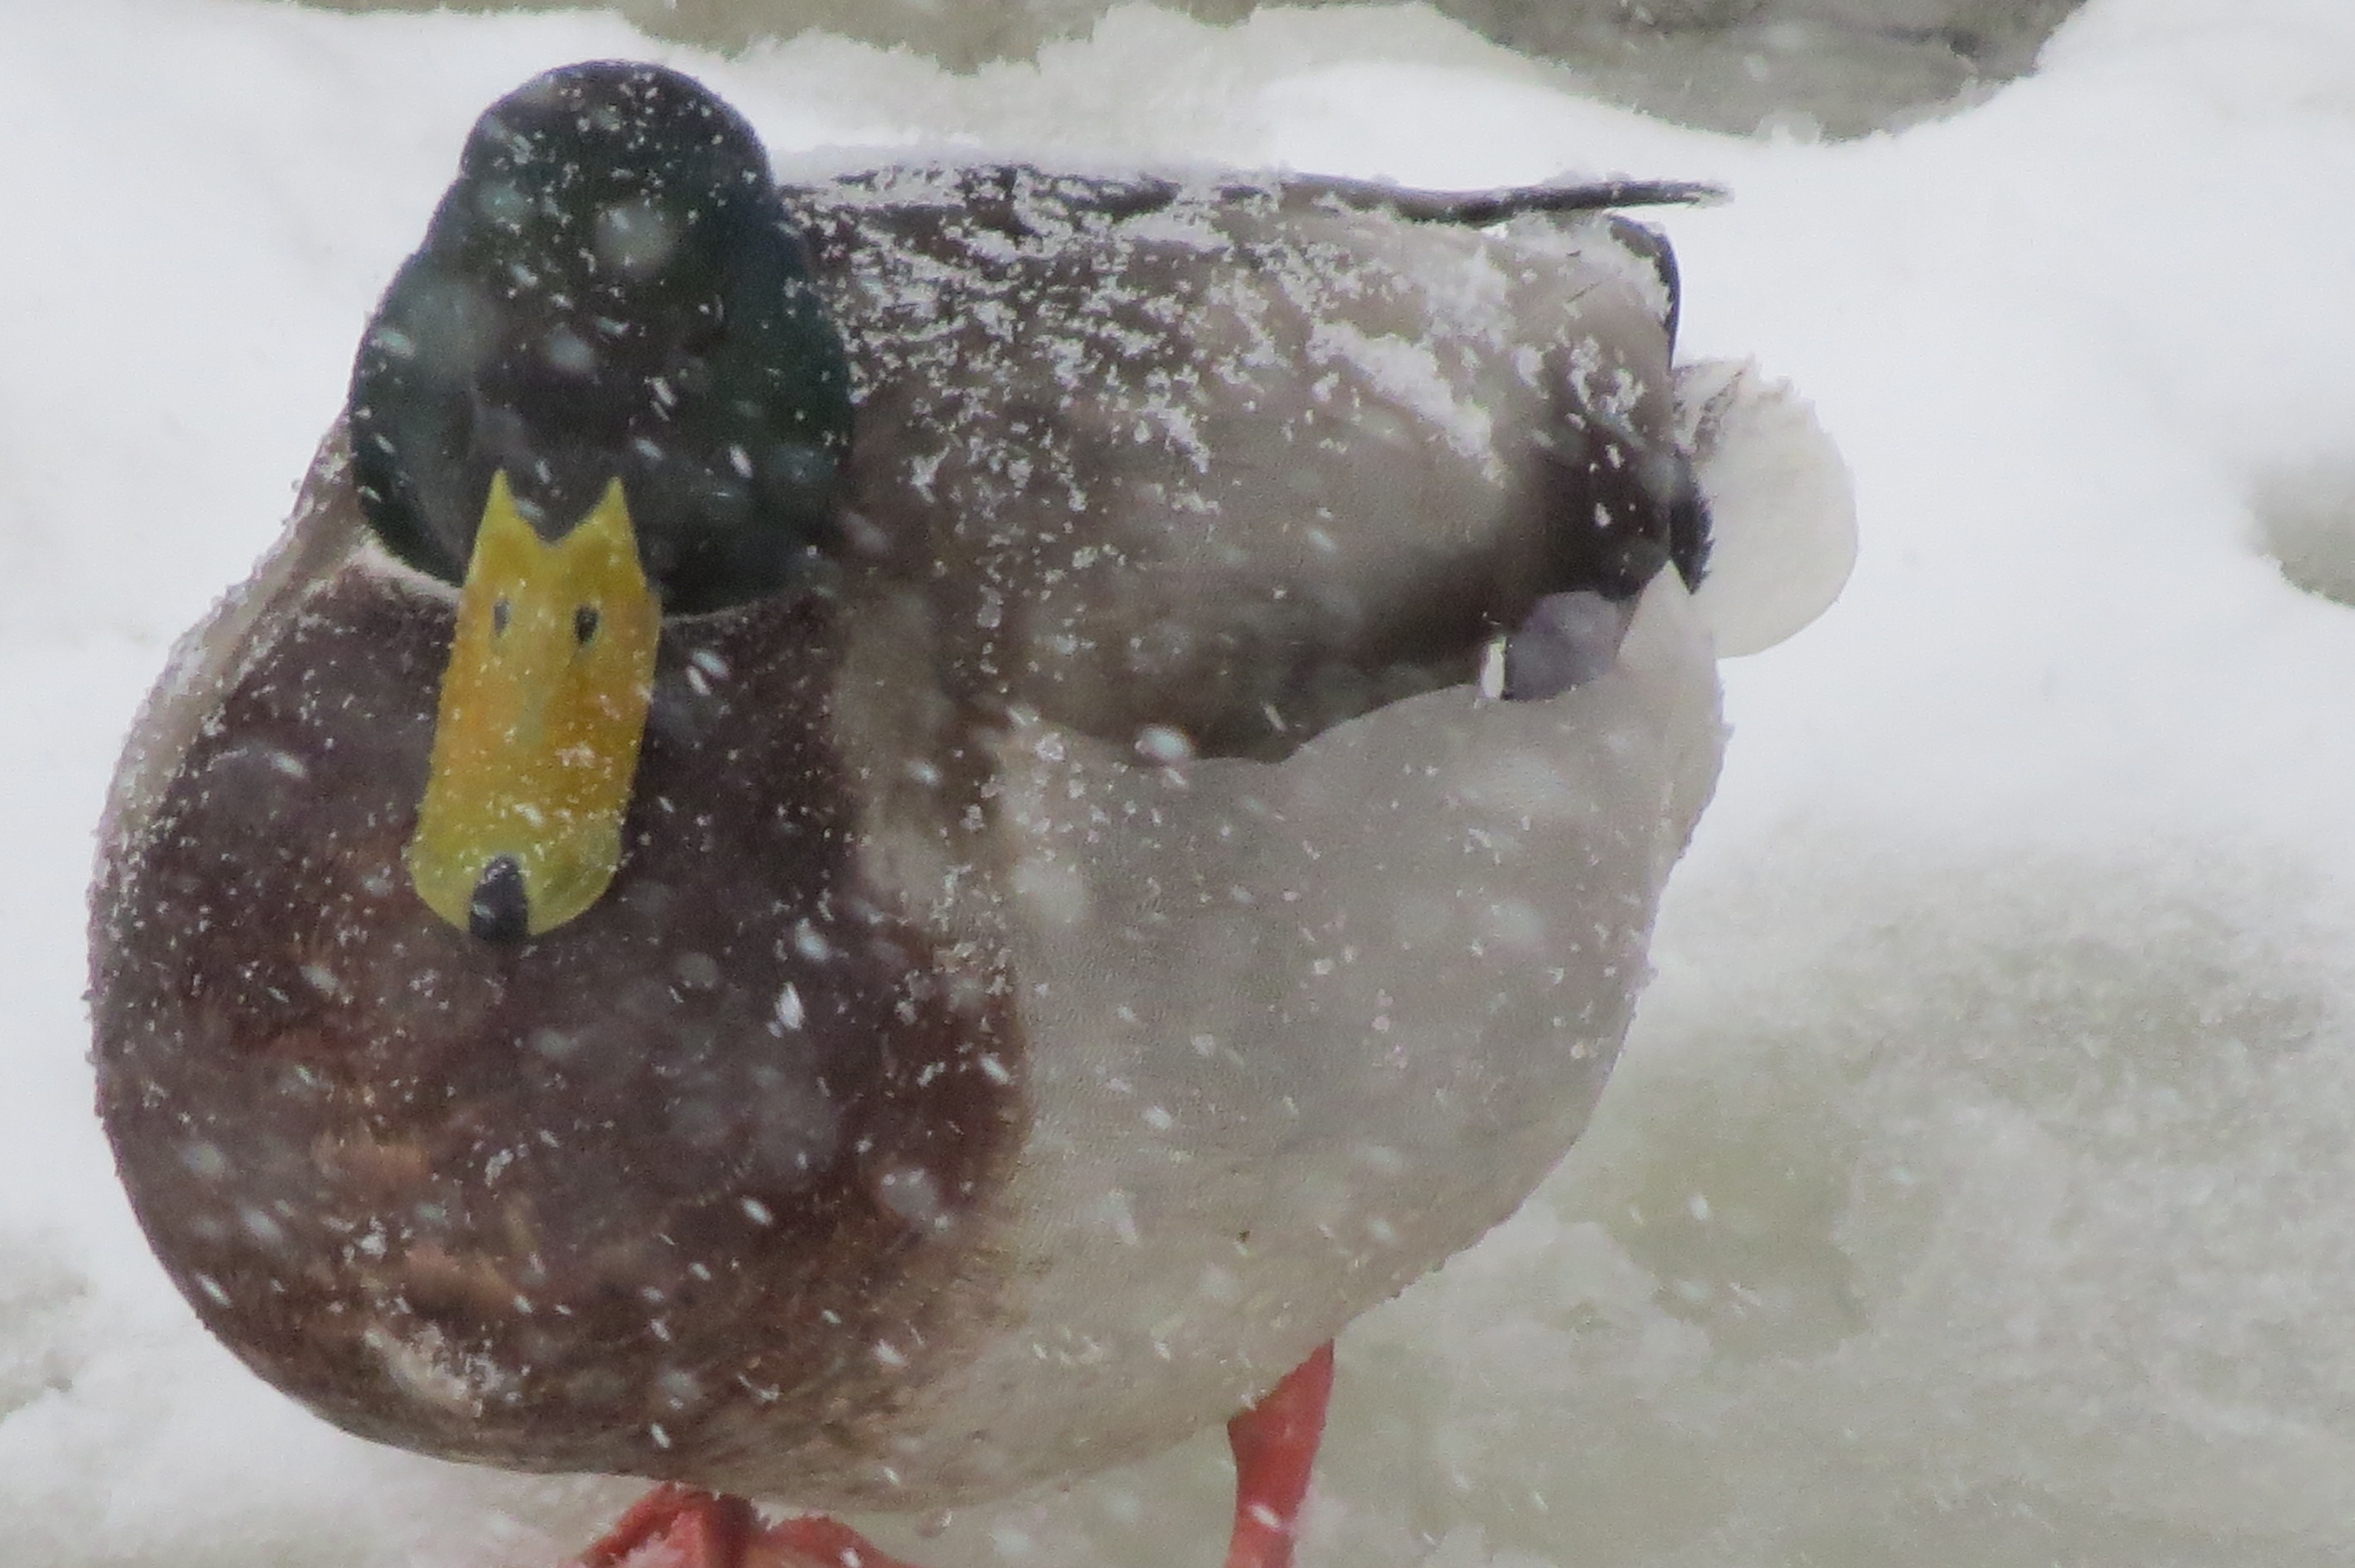 Duck in a Snowstorm, It's the weekend! Number 39